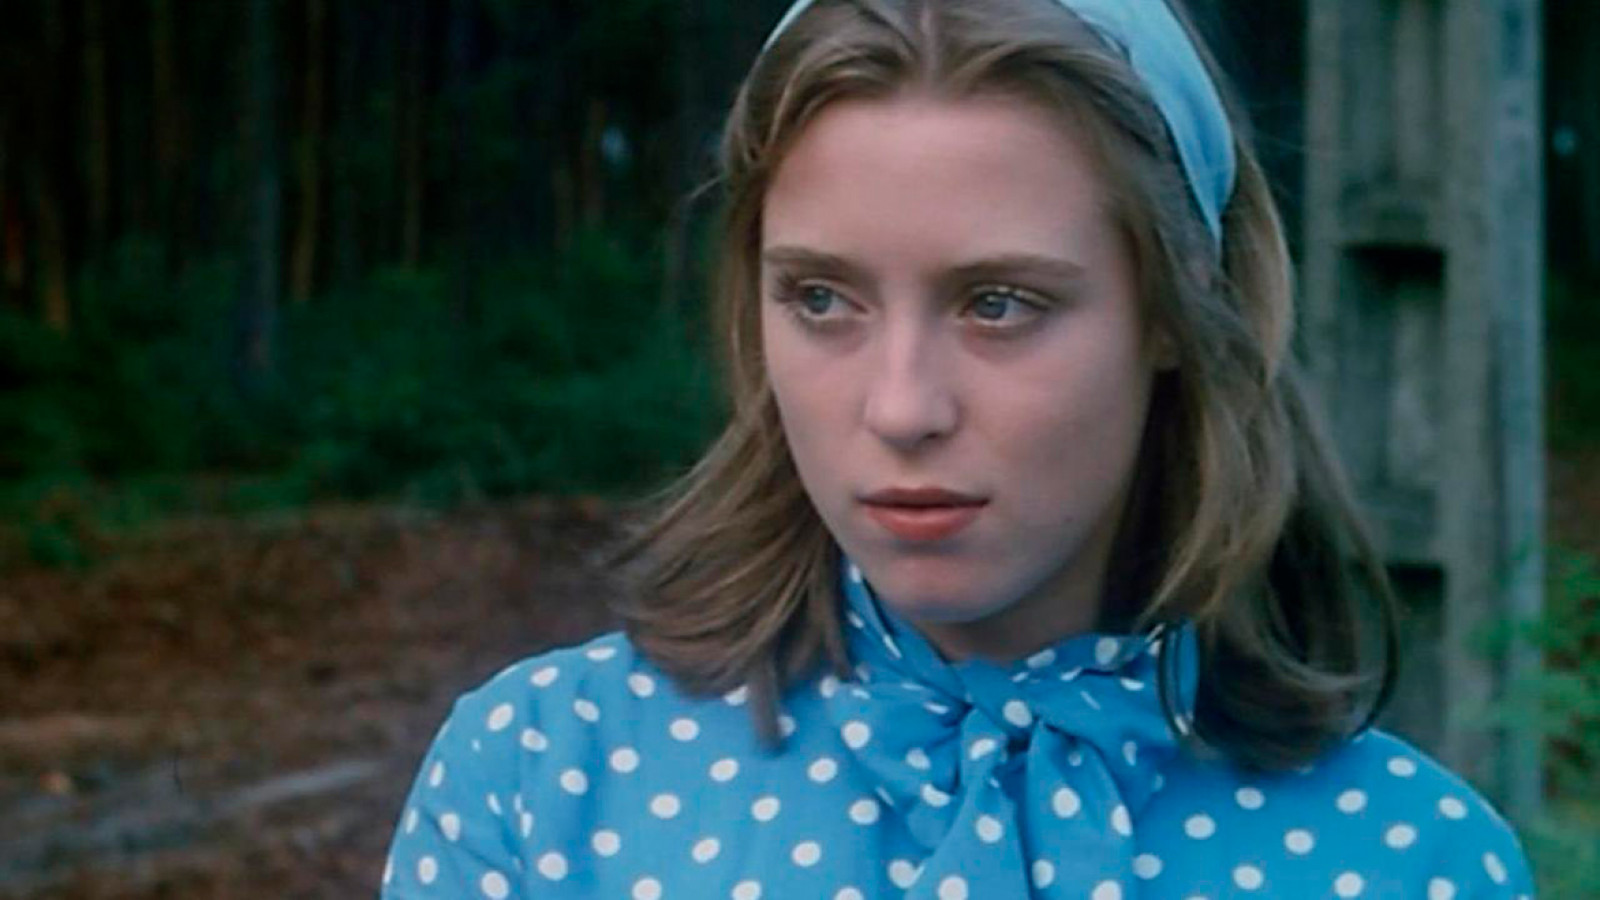 “A Real Young Girl” by Catherine Breillat